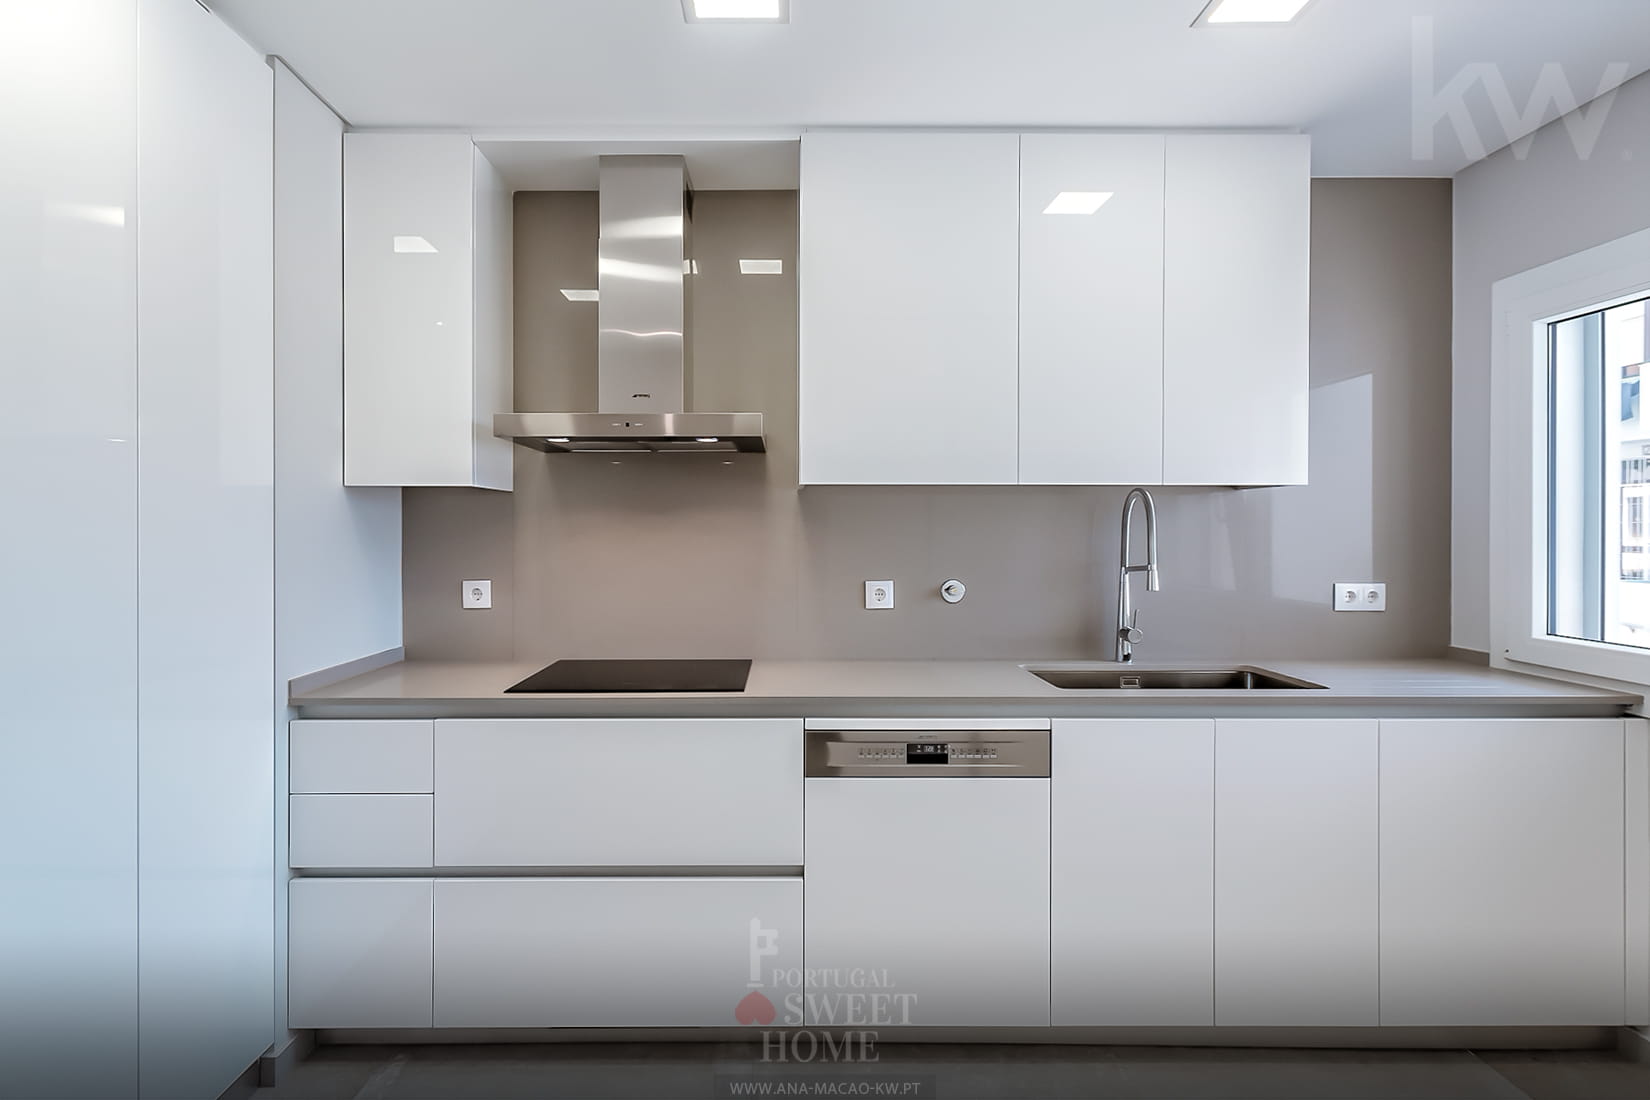 Fully equipped kitchen (11 m2)